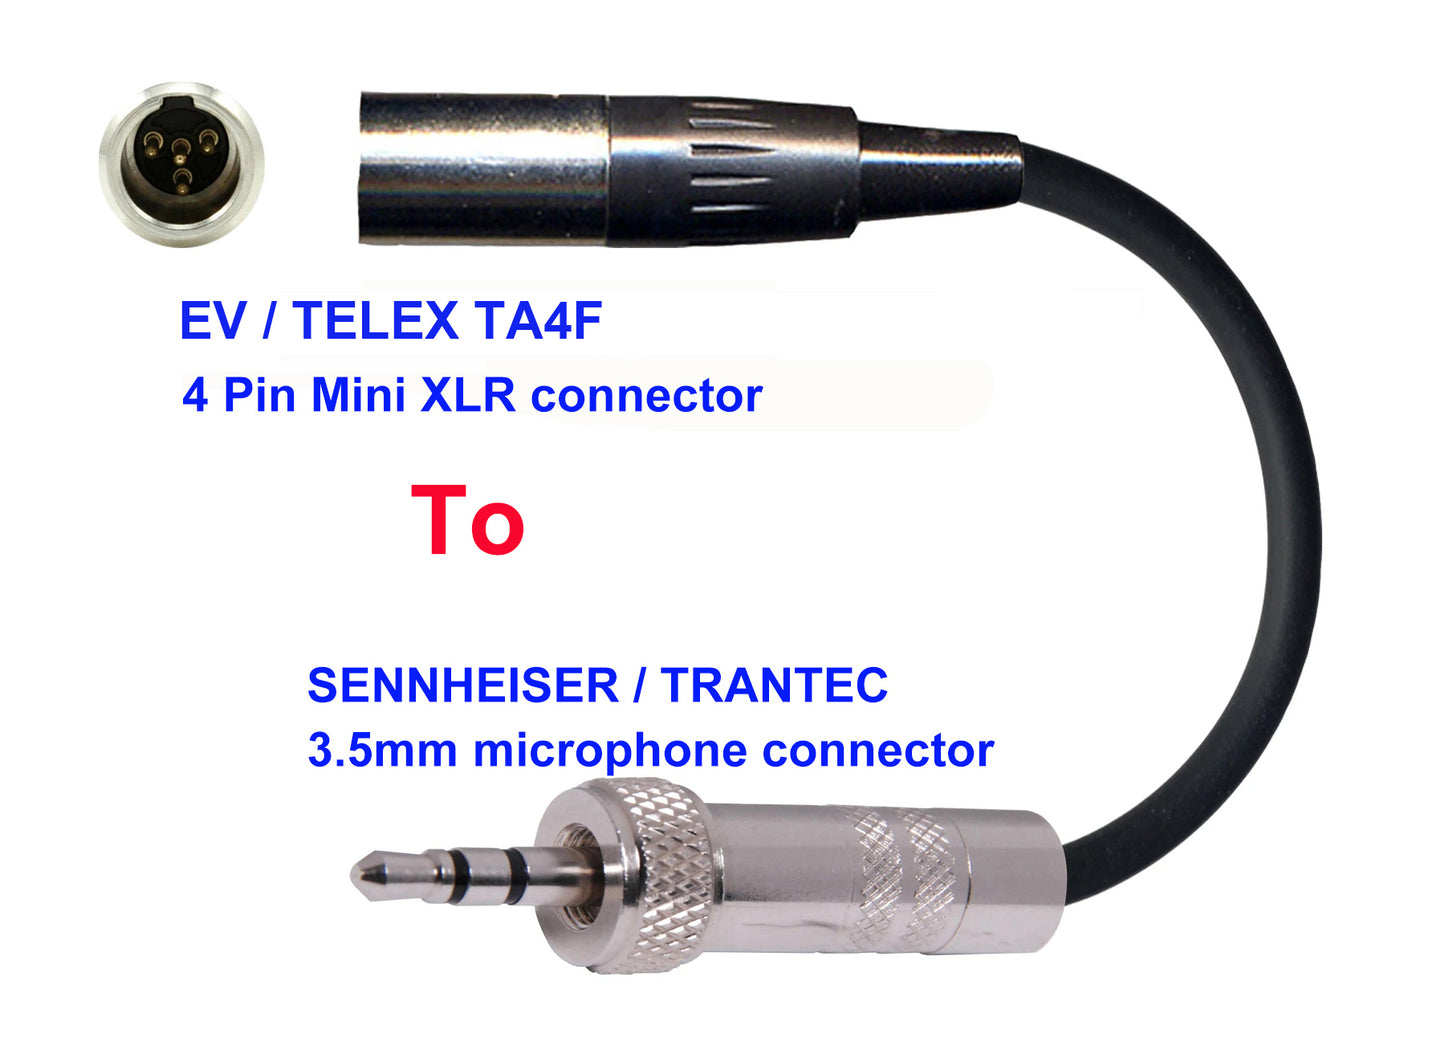 Microphone Adapter - EV / Telex Microphones with TA4F 4 pin mini XLR connector TO Sennheiser / Trantec Transmitters with 3.5mm Locking connector